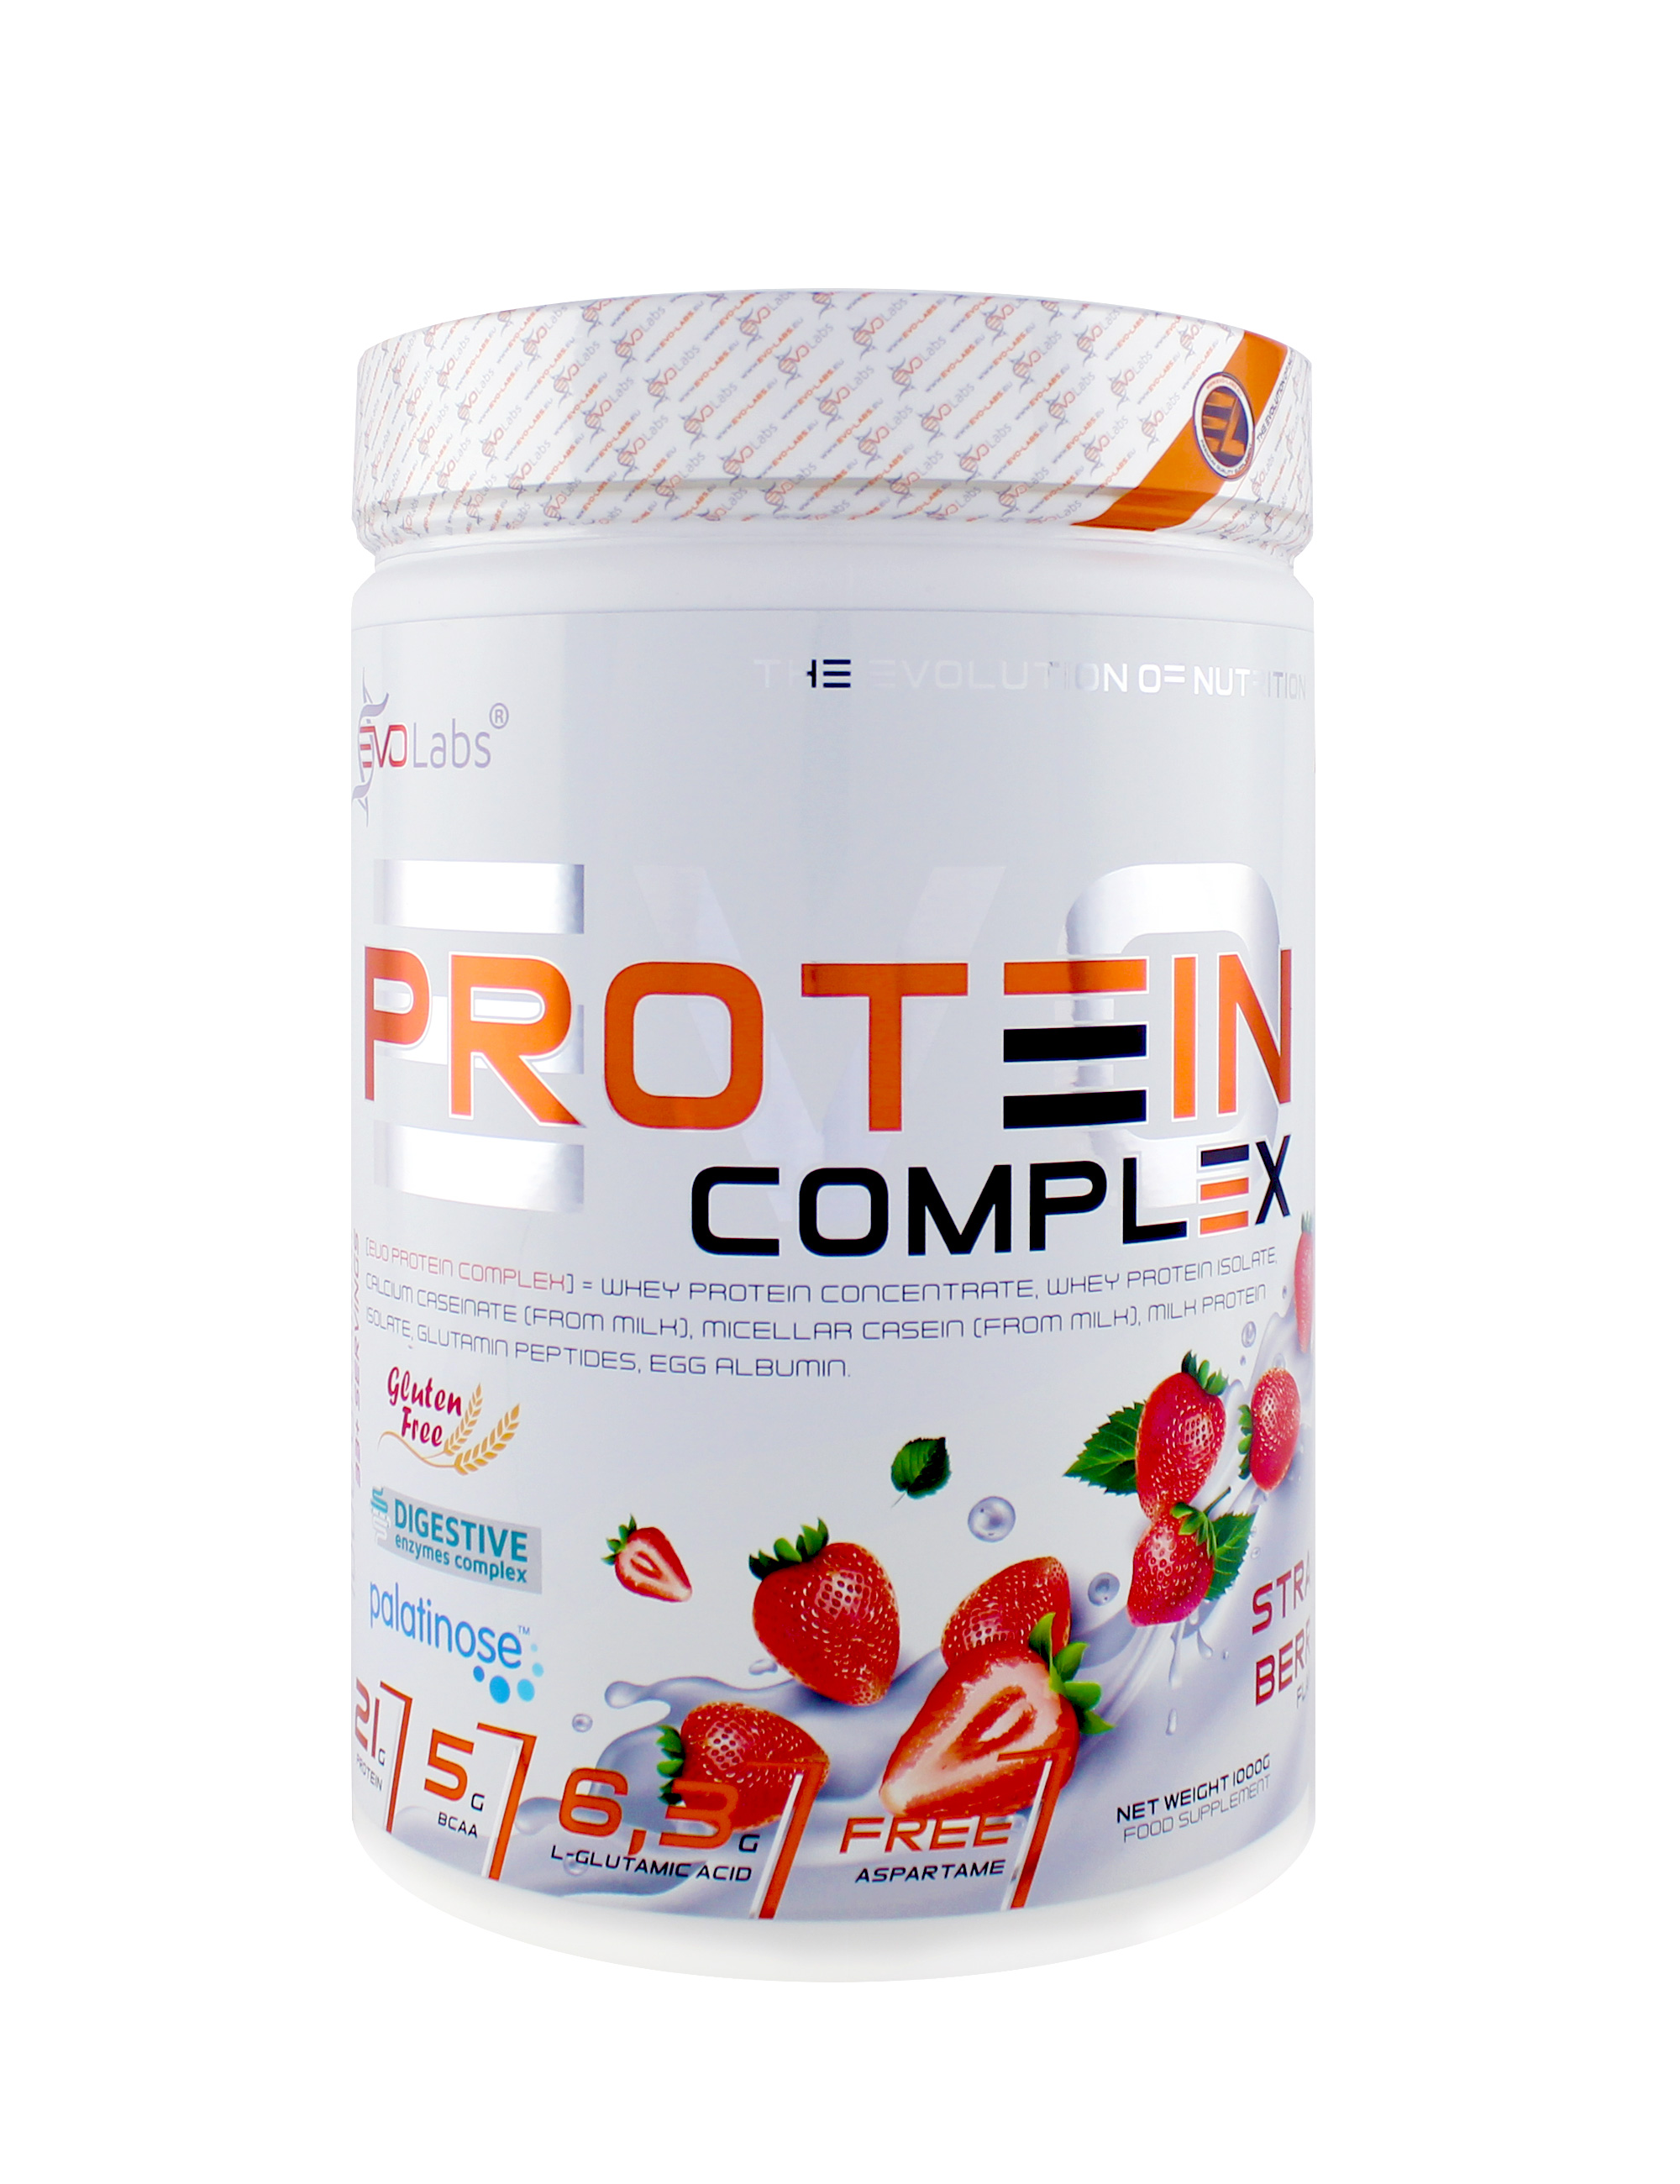 EVOLabs Protein Complex 1000g - Chocolate